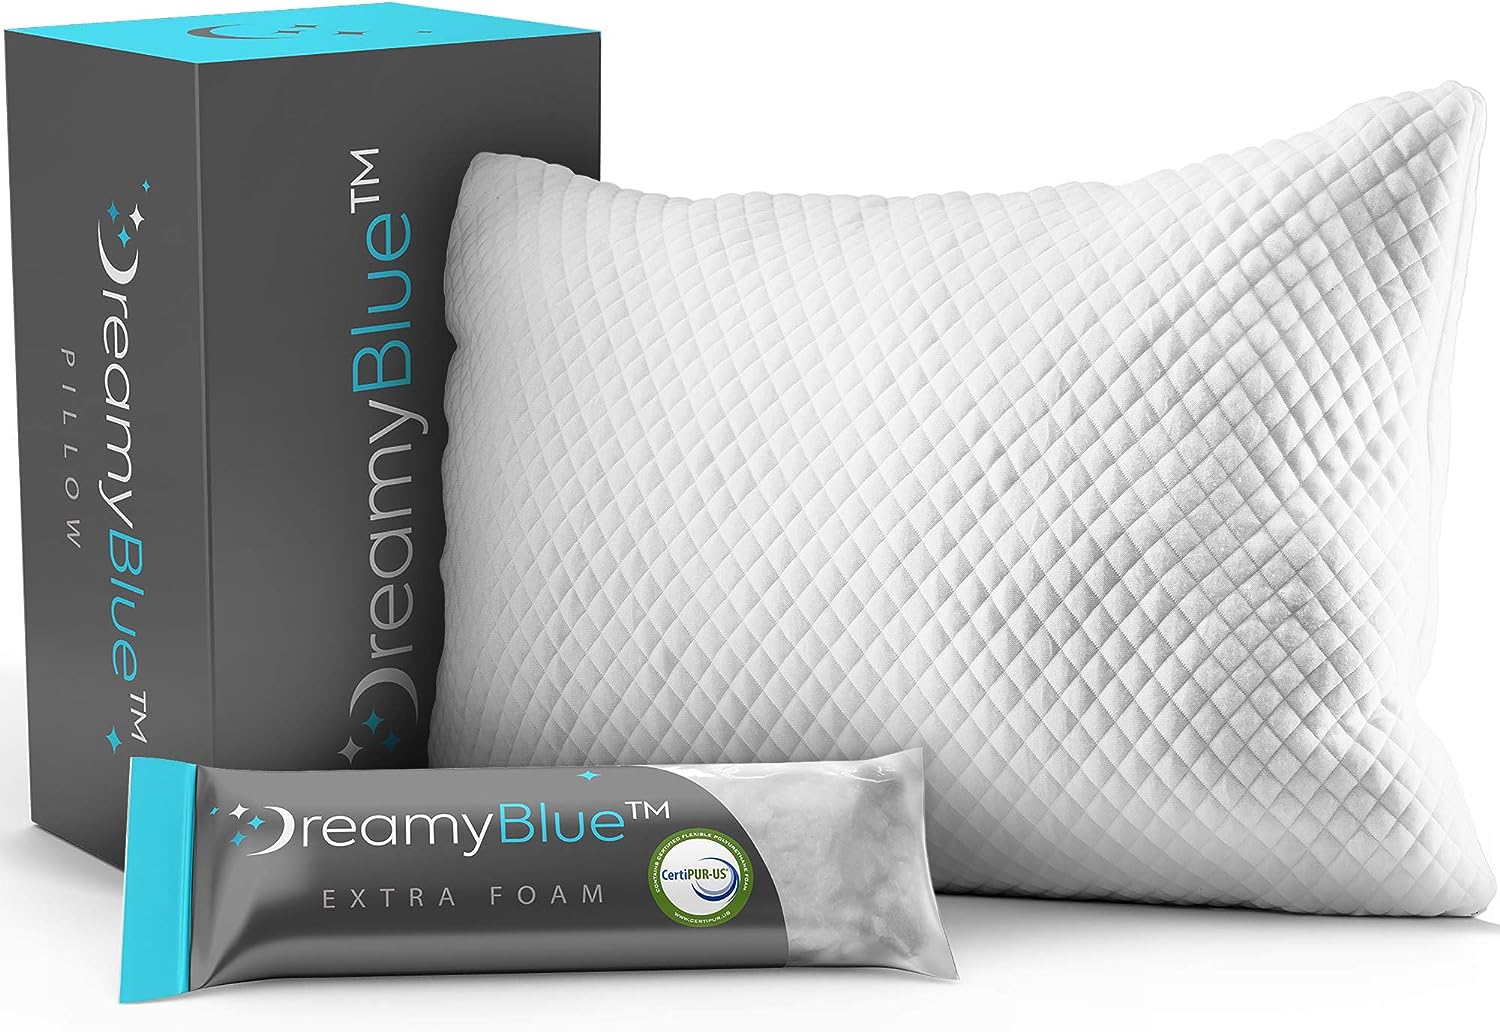 DreamyBlue Premium Pillow for Sleeping - Shredded Memory Foam Fill [Adjustable Loft] Washable Cover from Bamboo Derived Rayon - for Side, Back, Stomach